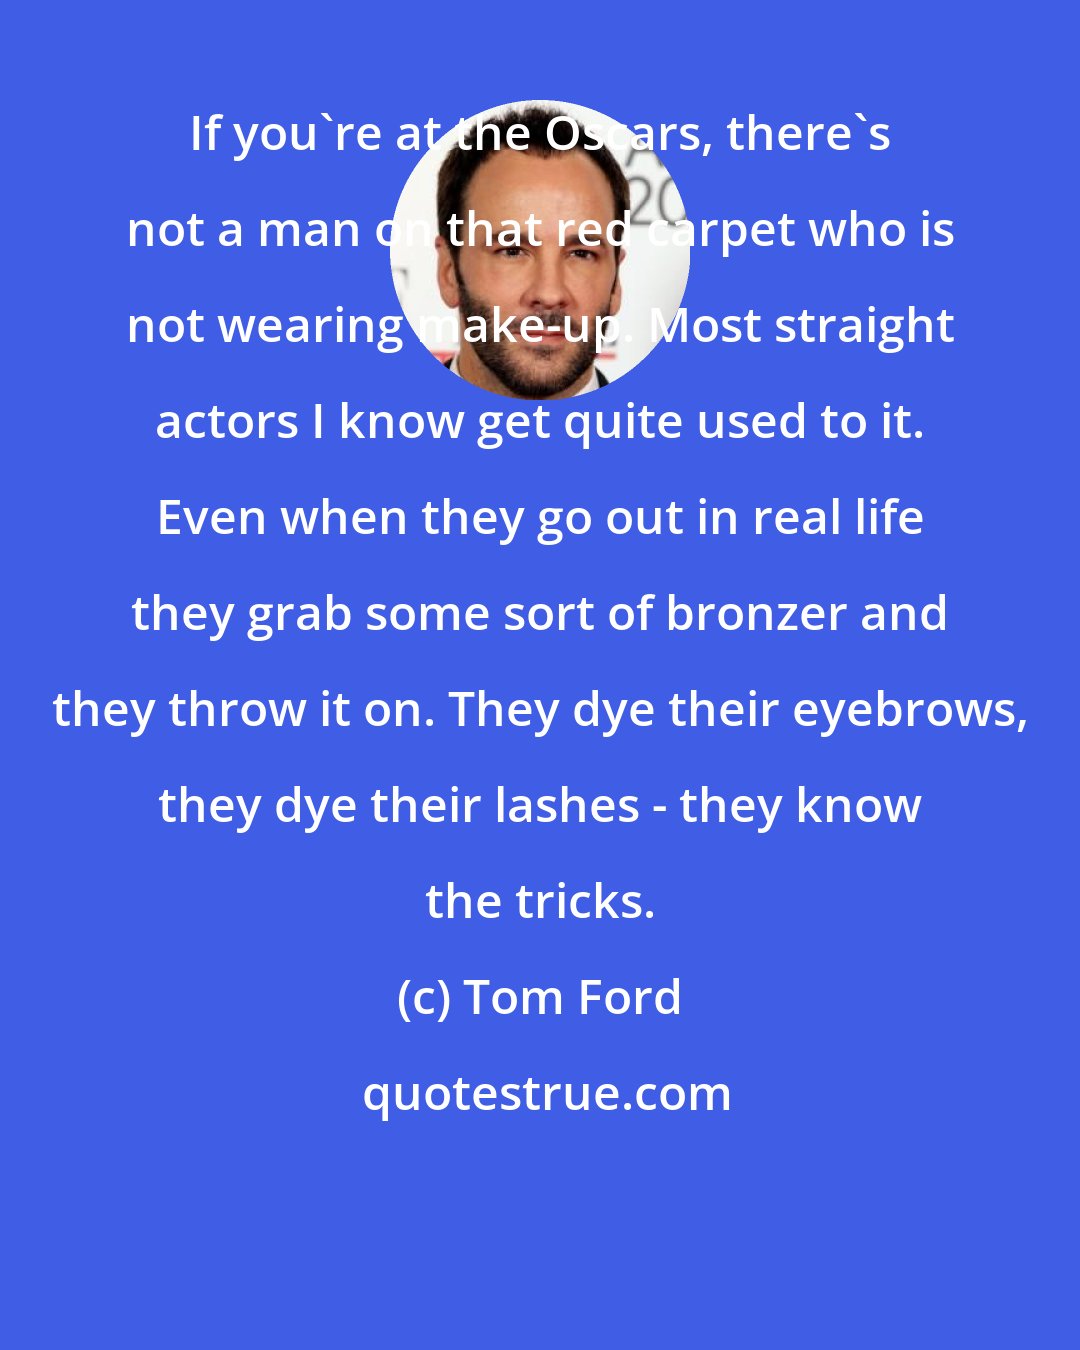 Tom Ford: If you're at the Oscars, there's not a man on that red carpet who is not wearing make-up. Most straight actors I know get quite used to it. Even when they go out in real life they grab some sort of bronzer and they throw it on. They dye their eyebrows, they dye their lashes - they know the tricks.